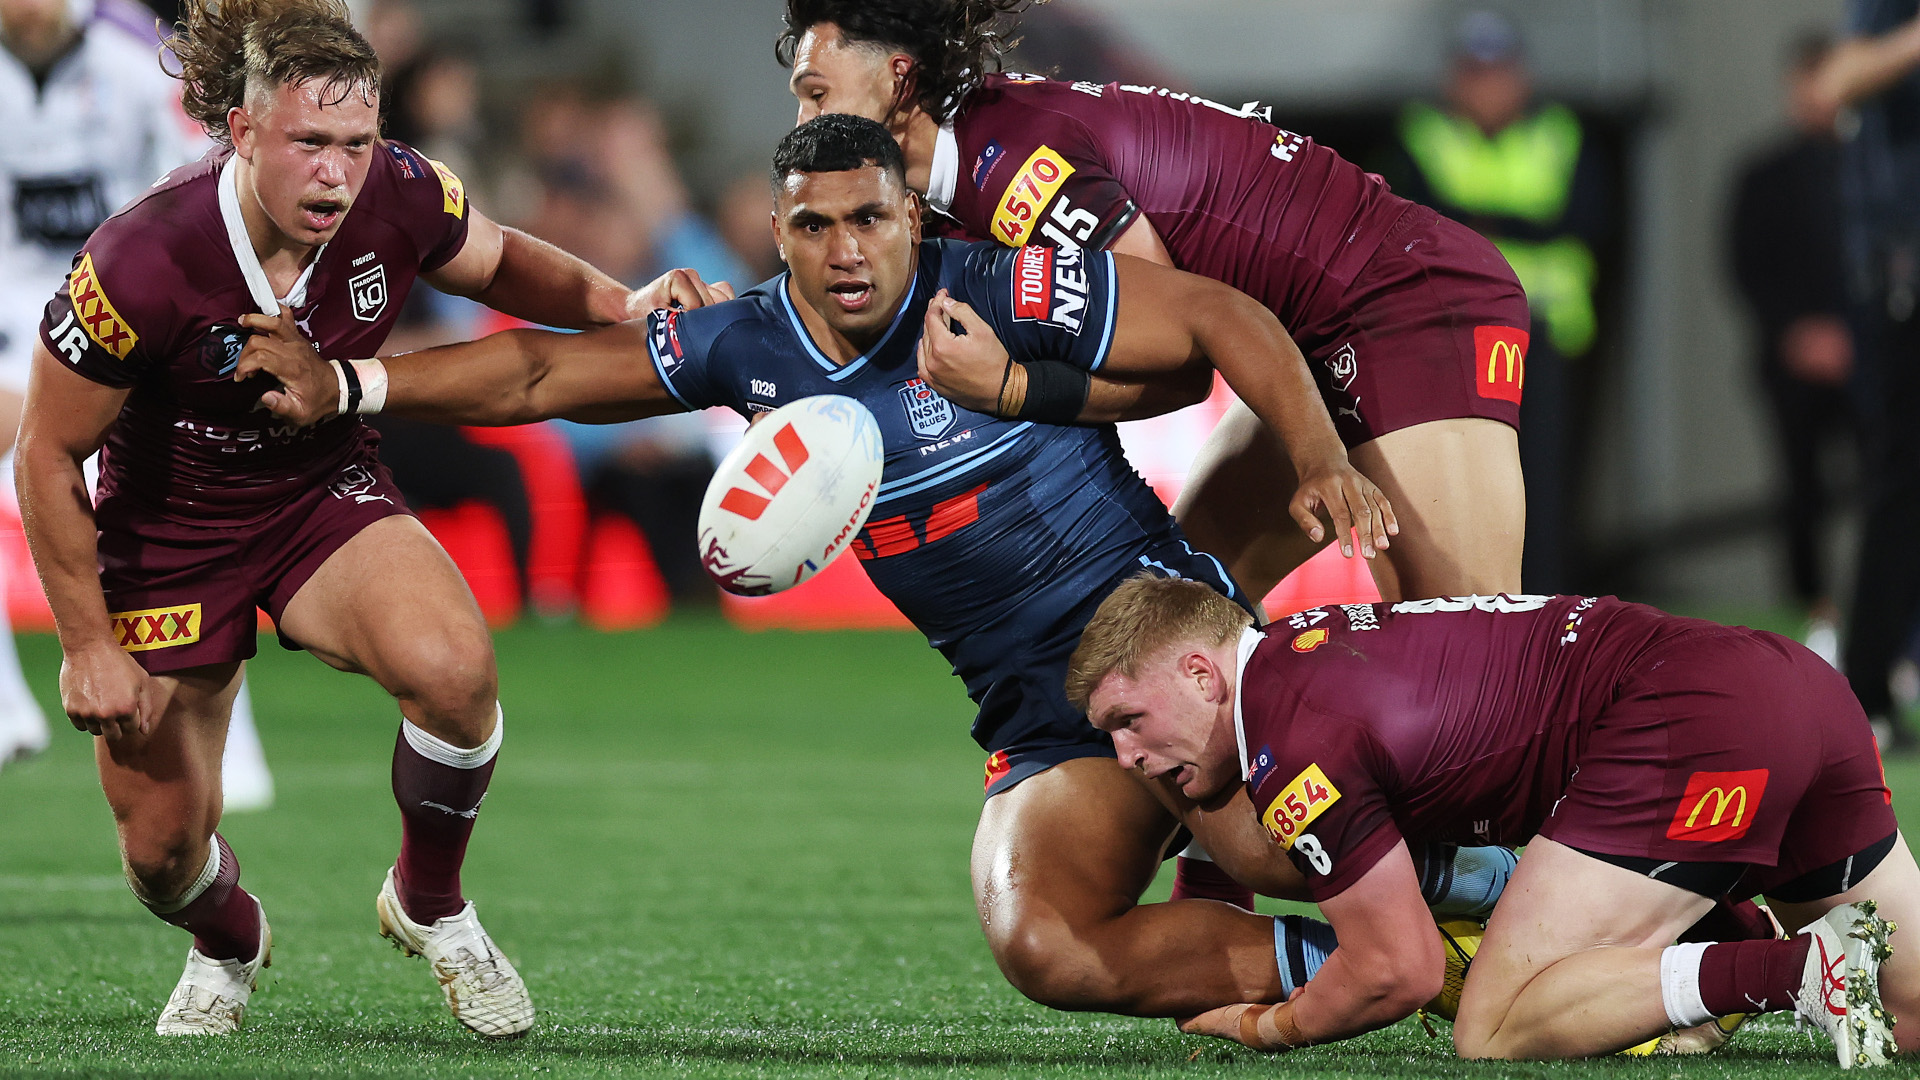 State of Origin Game 2 live stream How to watch QLD vs NSW free Tom